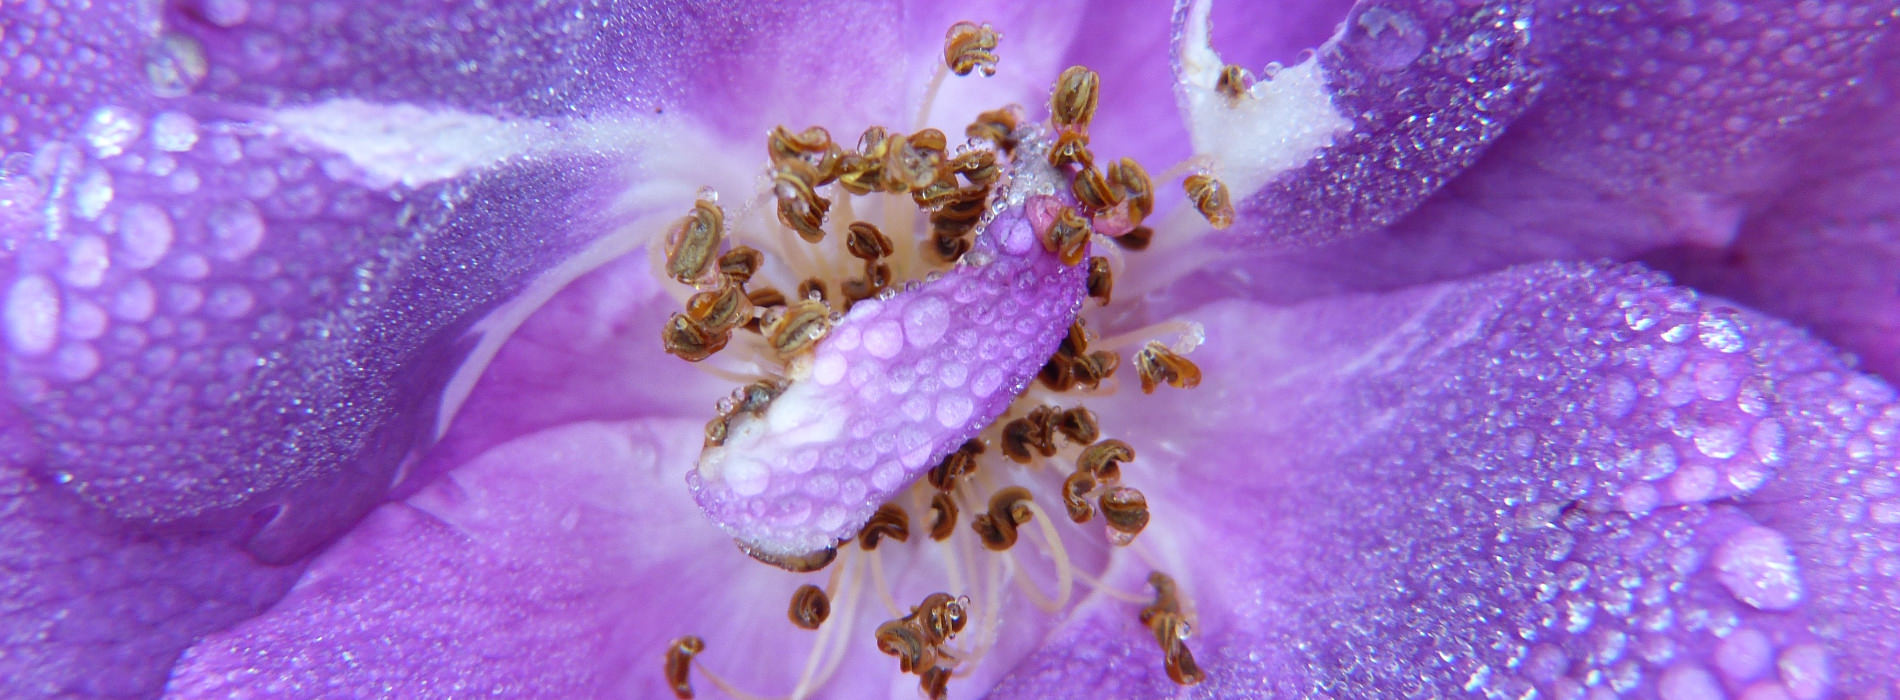 close up photo of the inside of a flower